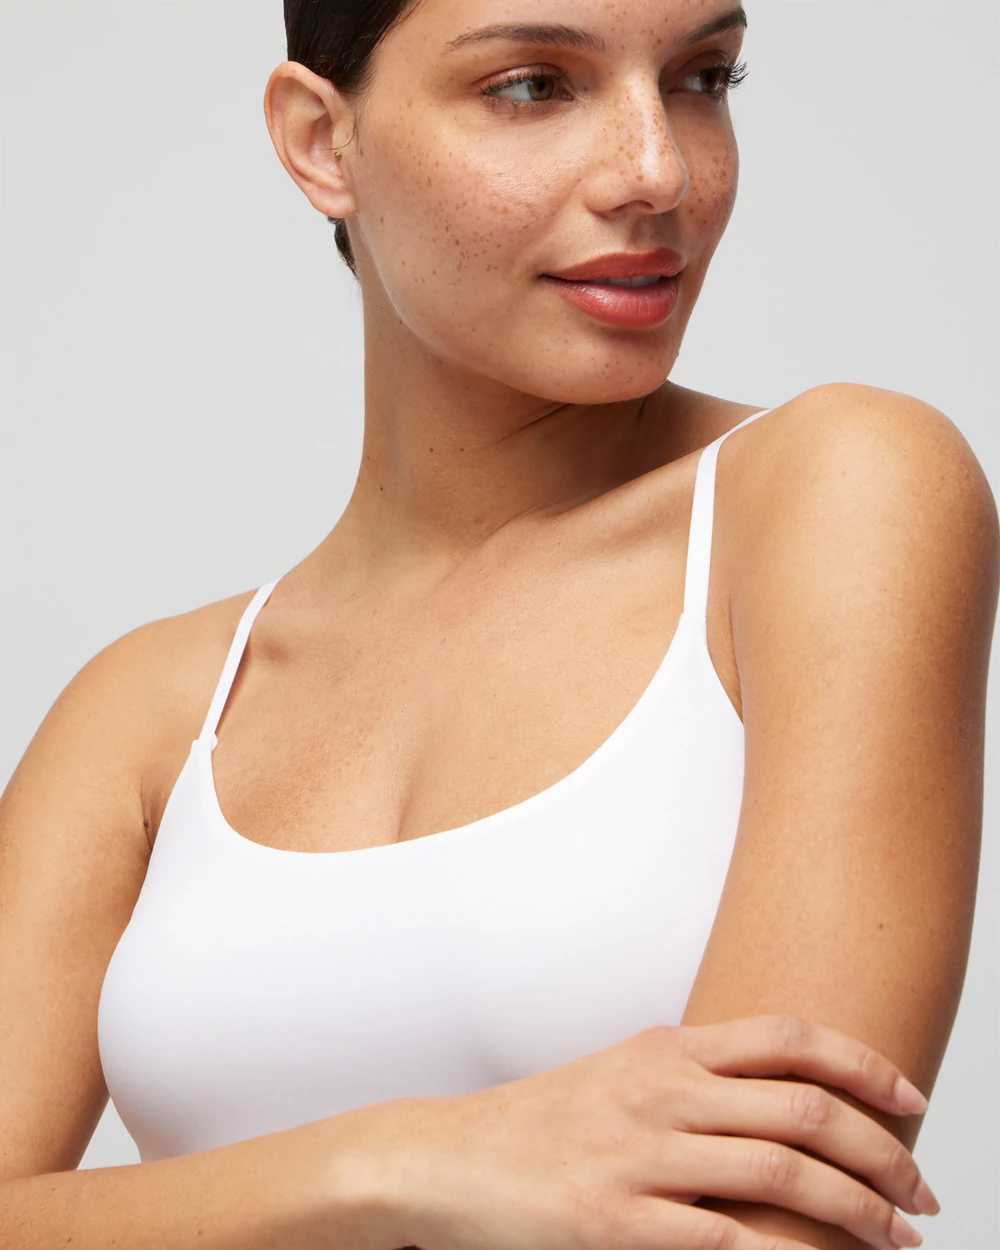 WHBM® FORME Scoop Neck Cami click to view larger image.